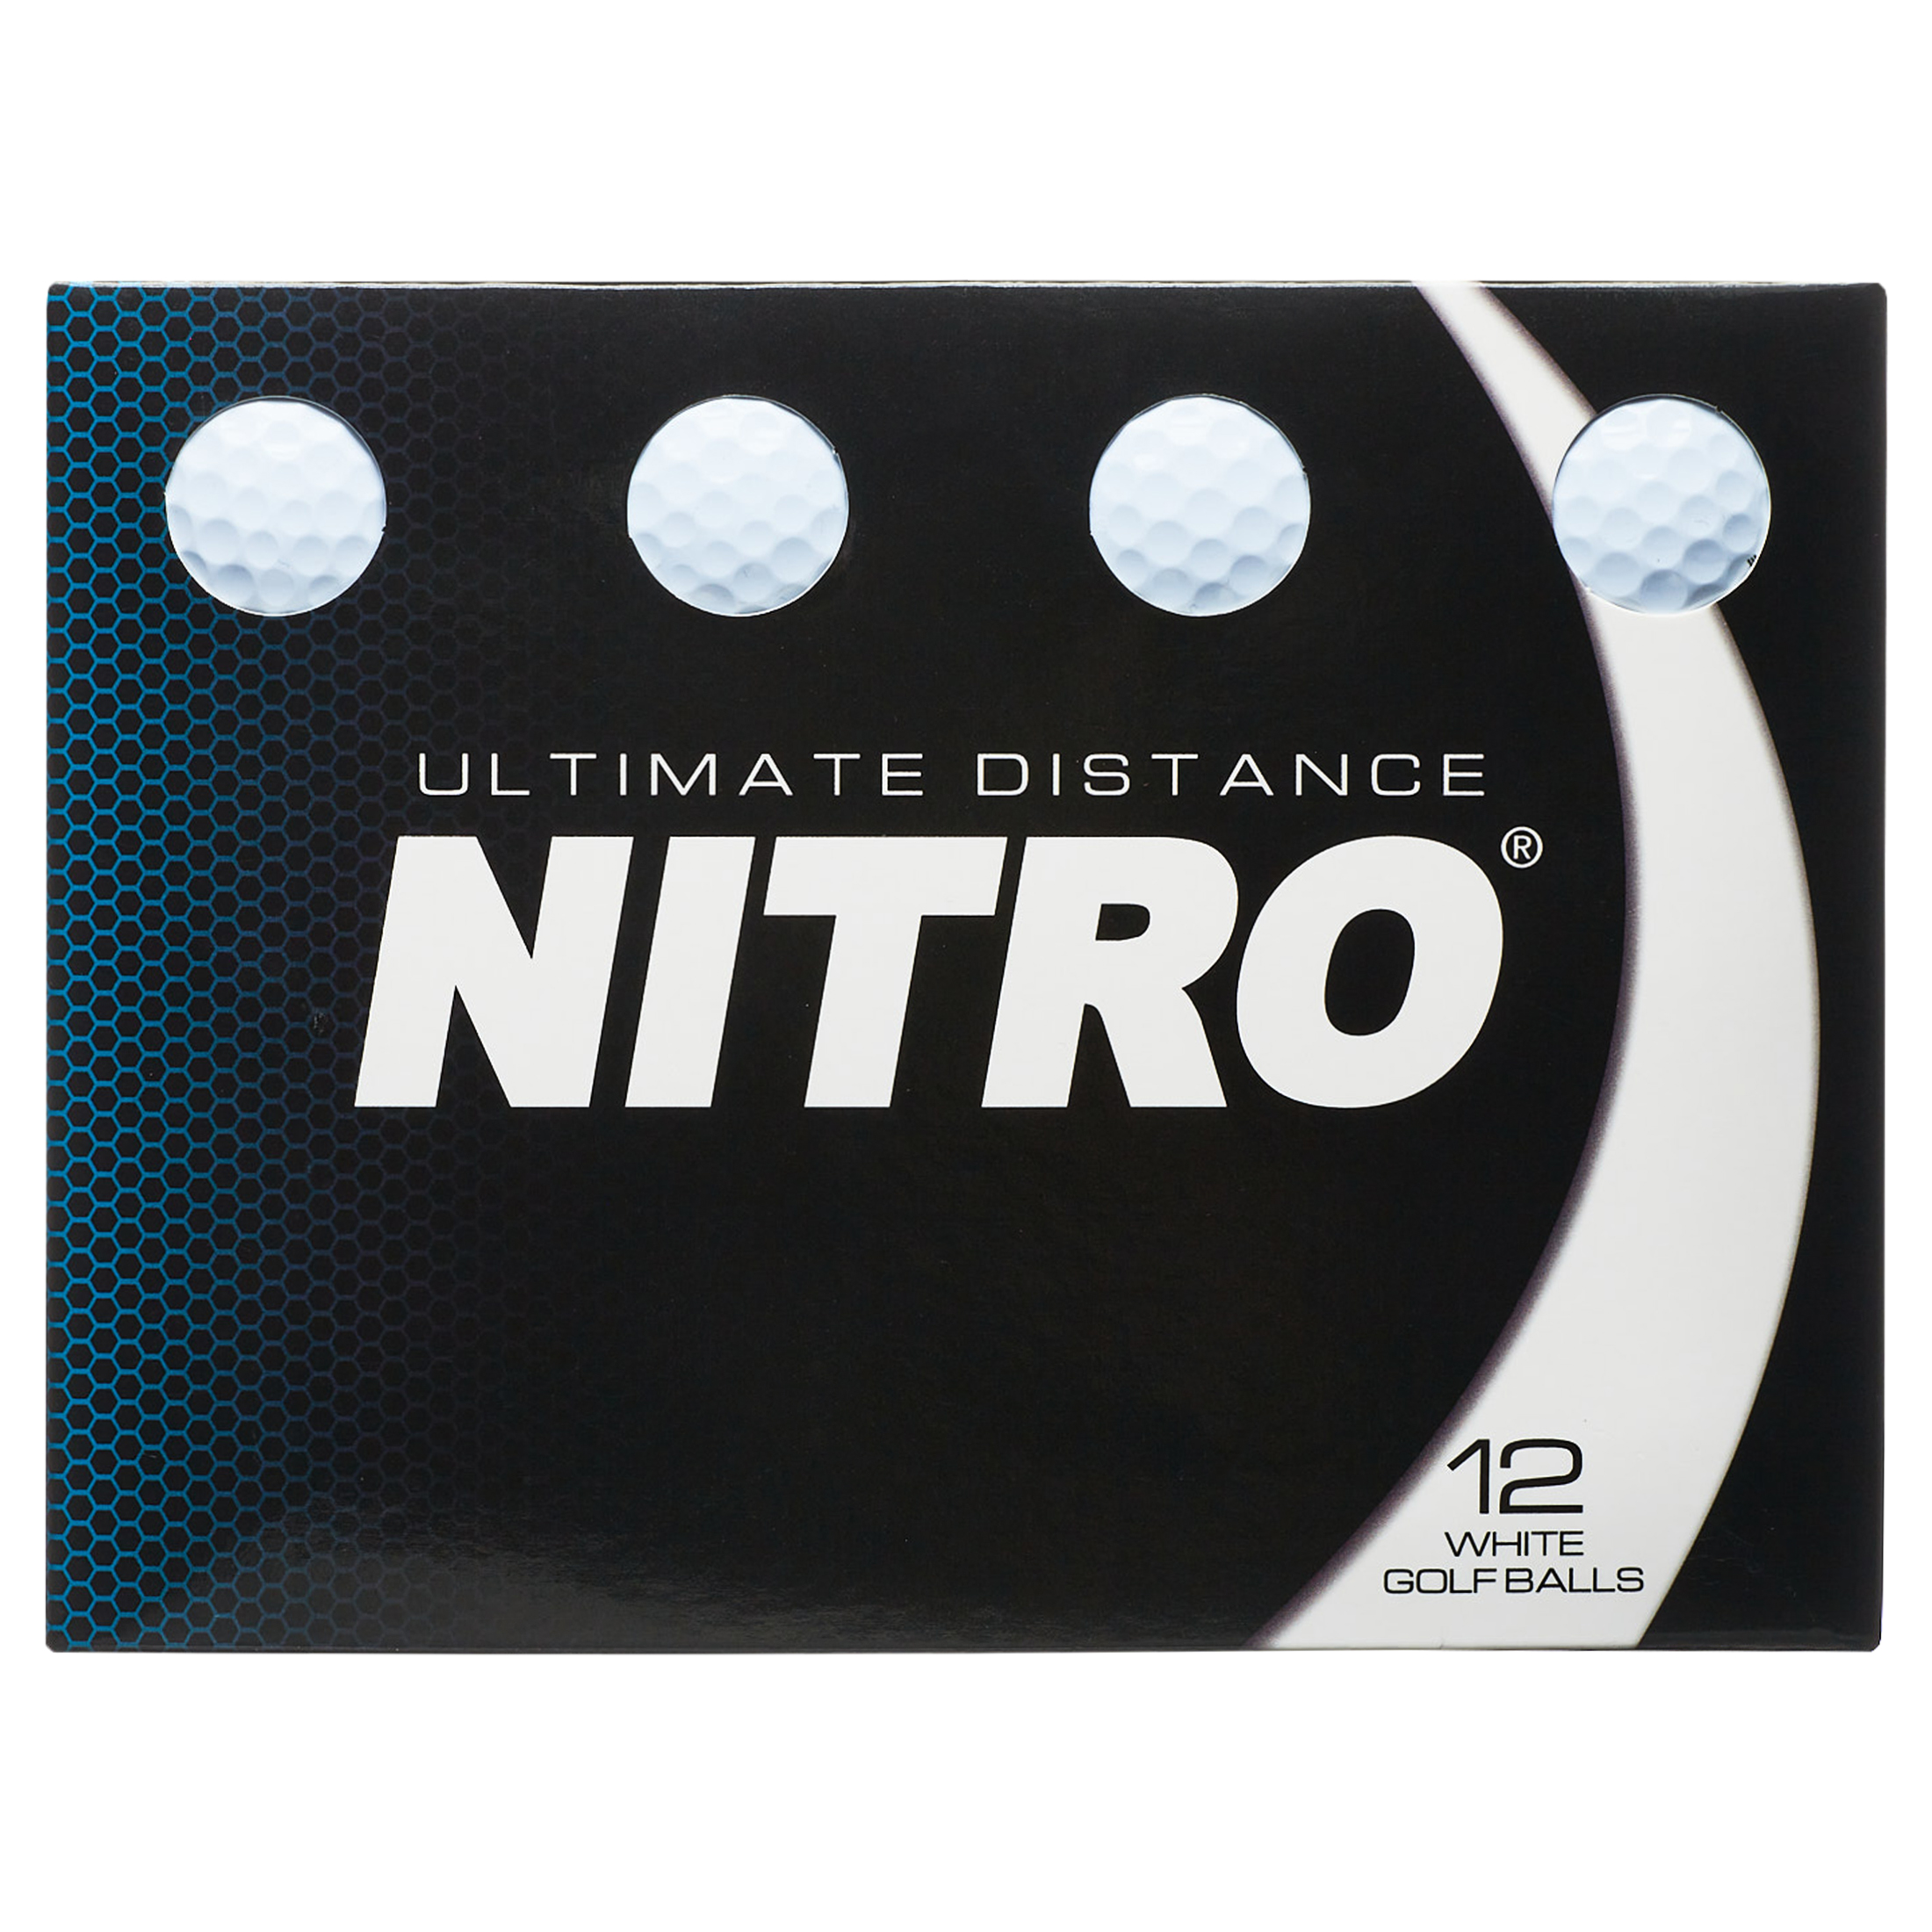 Nitro Golf Ultimate Distance Golf Balls, 12 Pack - image 1 of 4